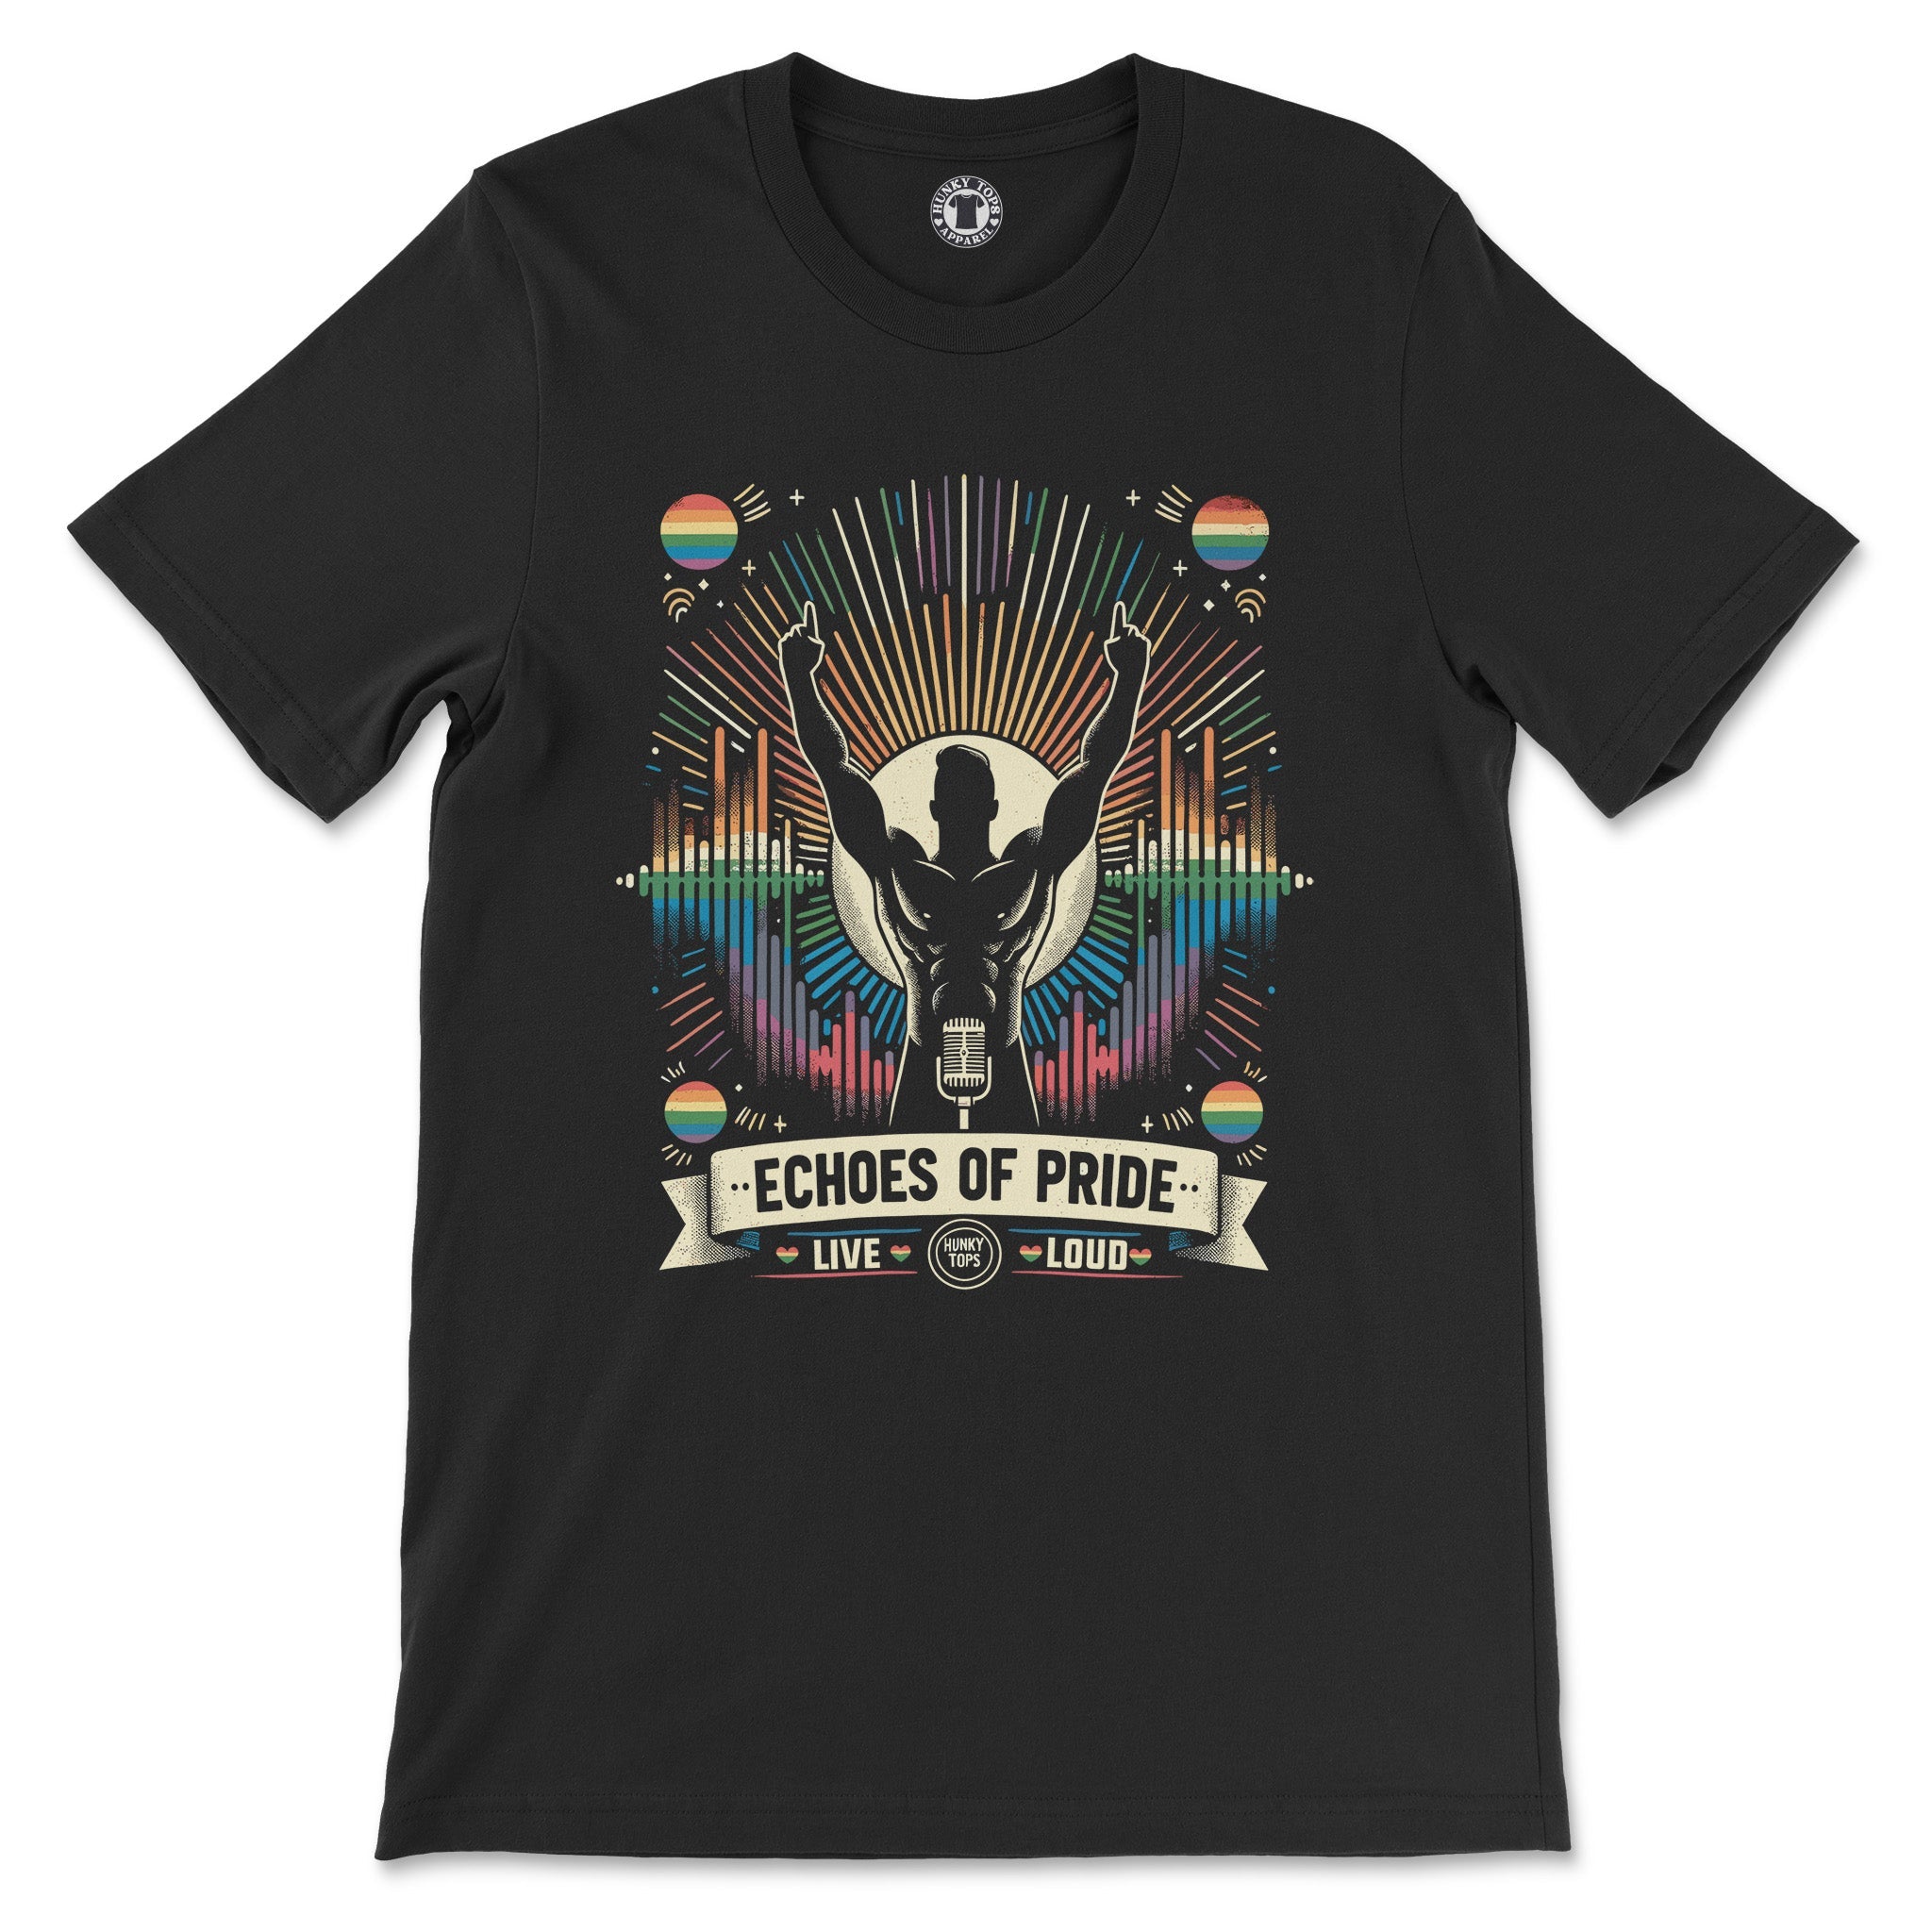 "Echoes of Pride" Vibrant Celebration Graphic Tee - Hunky Tops